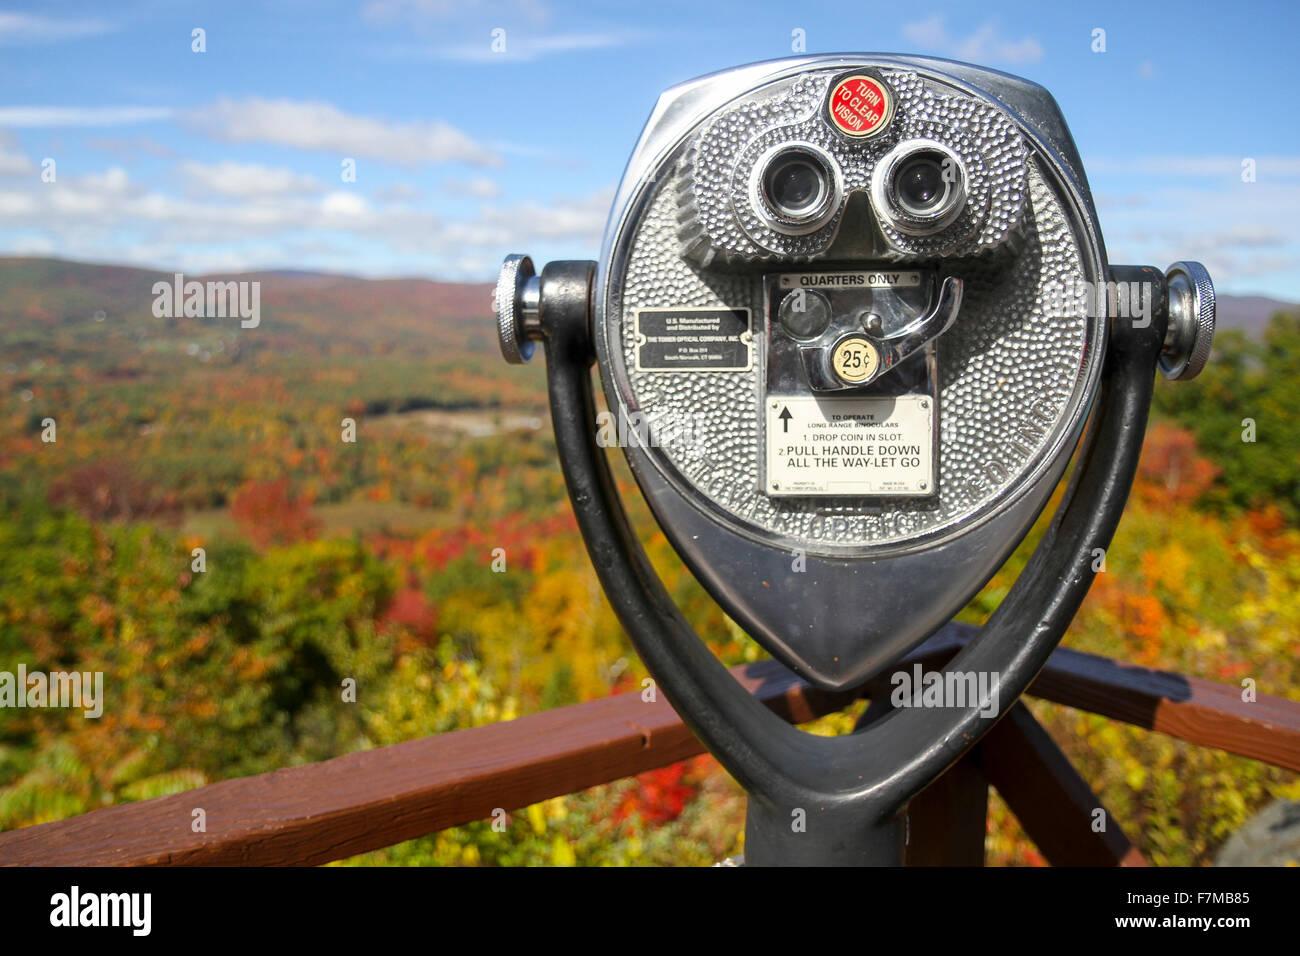 Coin-operated viewer near Route 2 in Berkshire County, Massachusetts Stock Photo